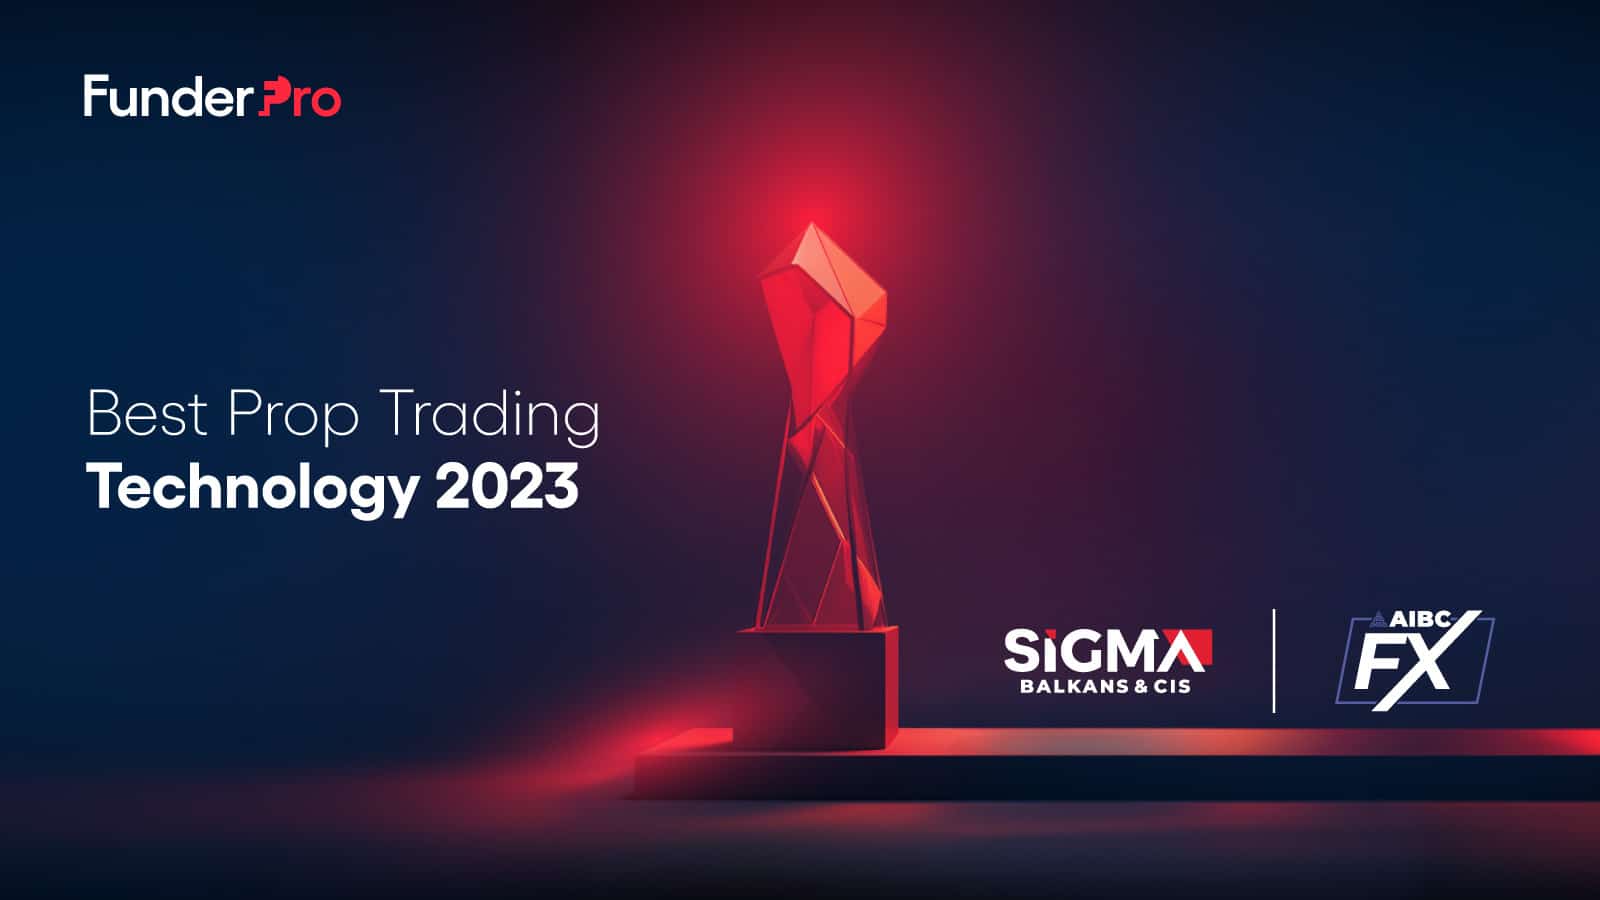 FunderPro won the "Best Prop Trading Platform Award" for 2023 at SiGMA FX in Limassol, Cyprus